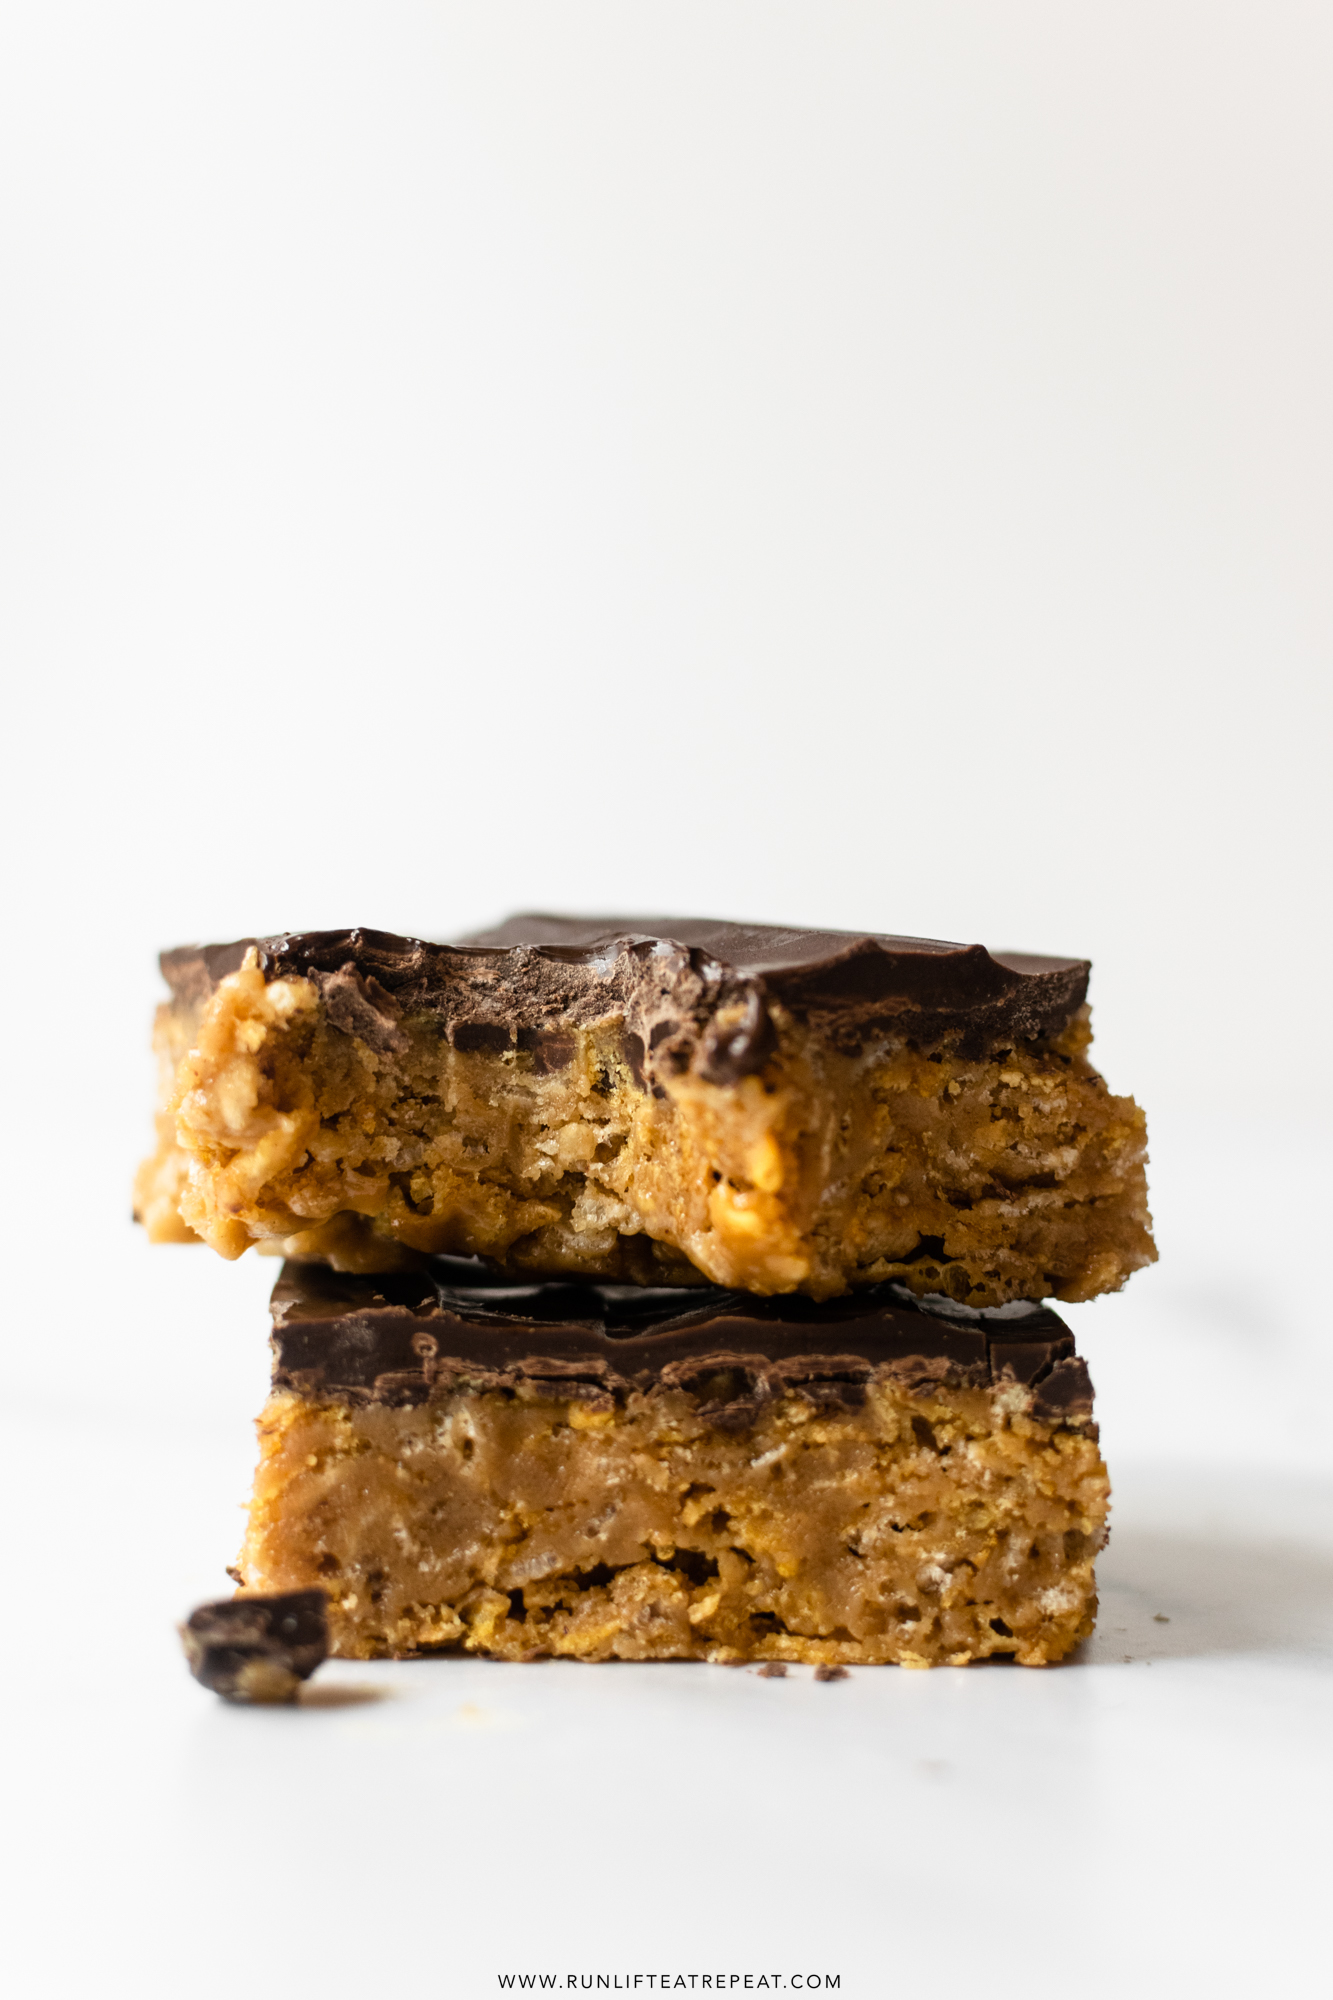 Made from just 8 ingredients, these no-bake chocolate peanut butter crunch bars are chewy, crispy, and irresistible. These are a delicious treat anytime of the year. No oven required! Warning: these bars are incredibly addicting. 